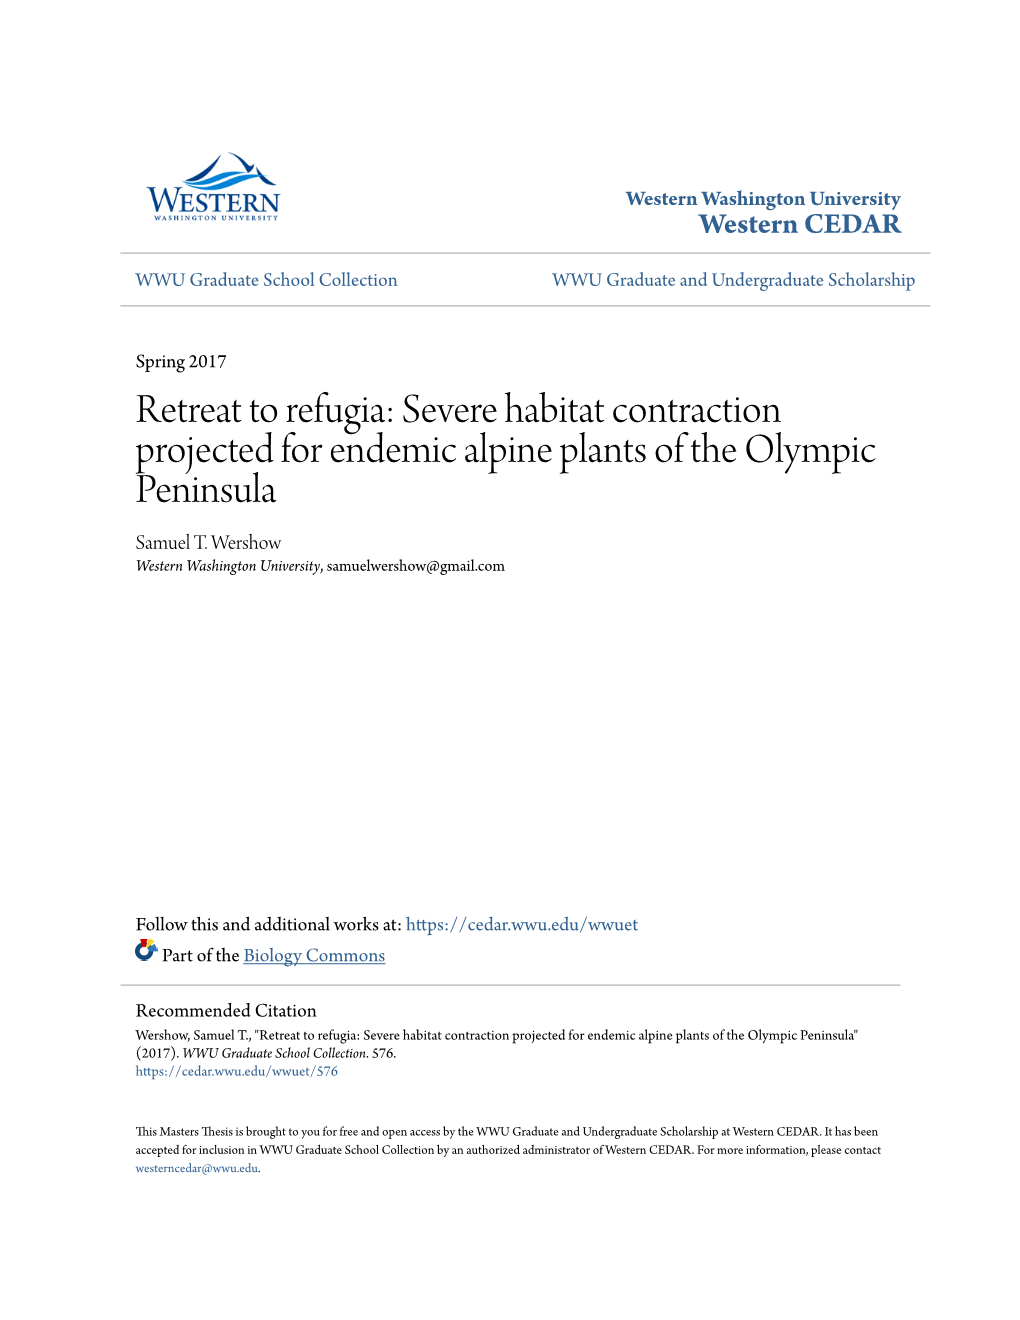 Severe Habitat Contraction Projected for Endemic Alpine Plants of the Olympic Peninsula Samuel T